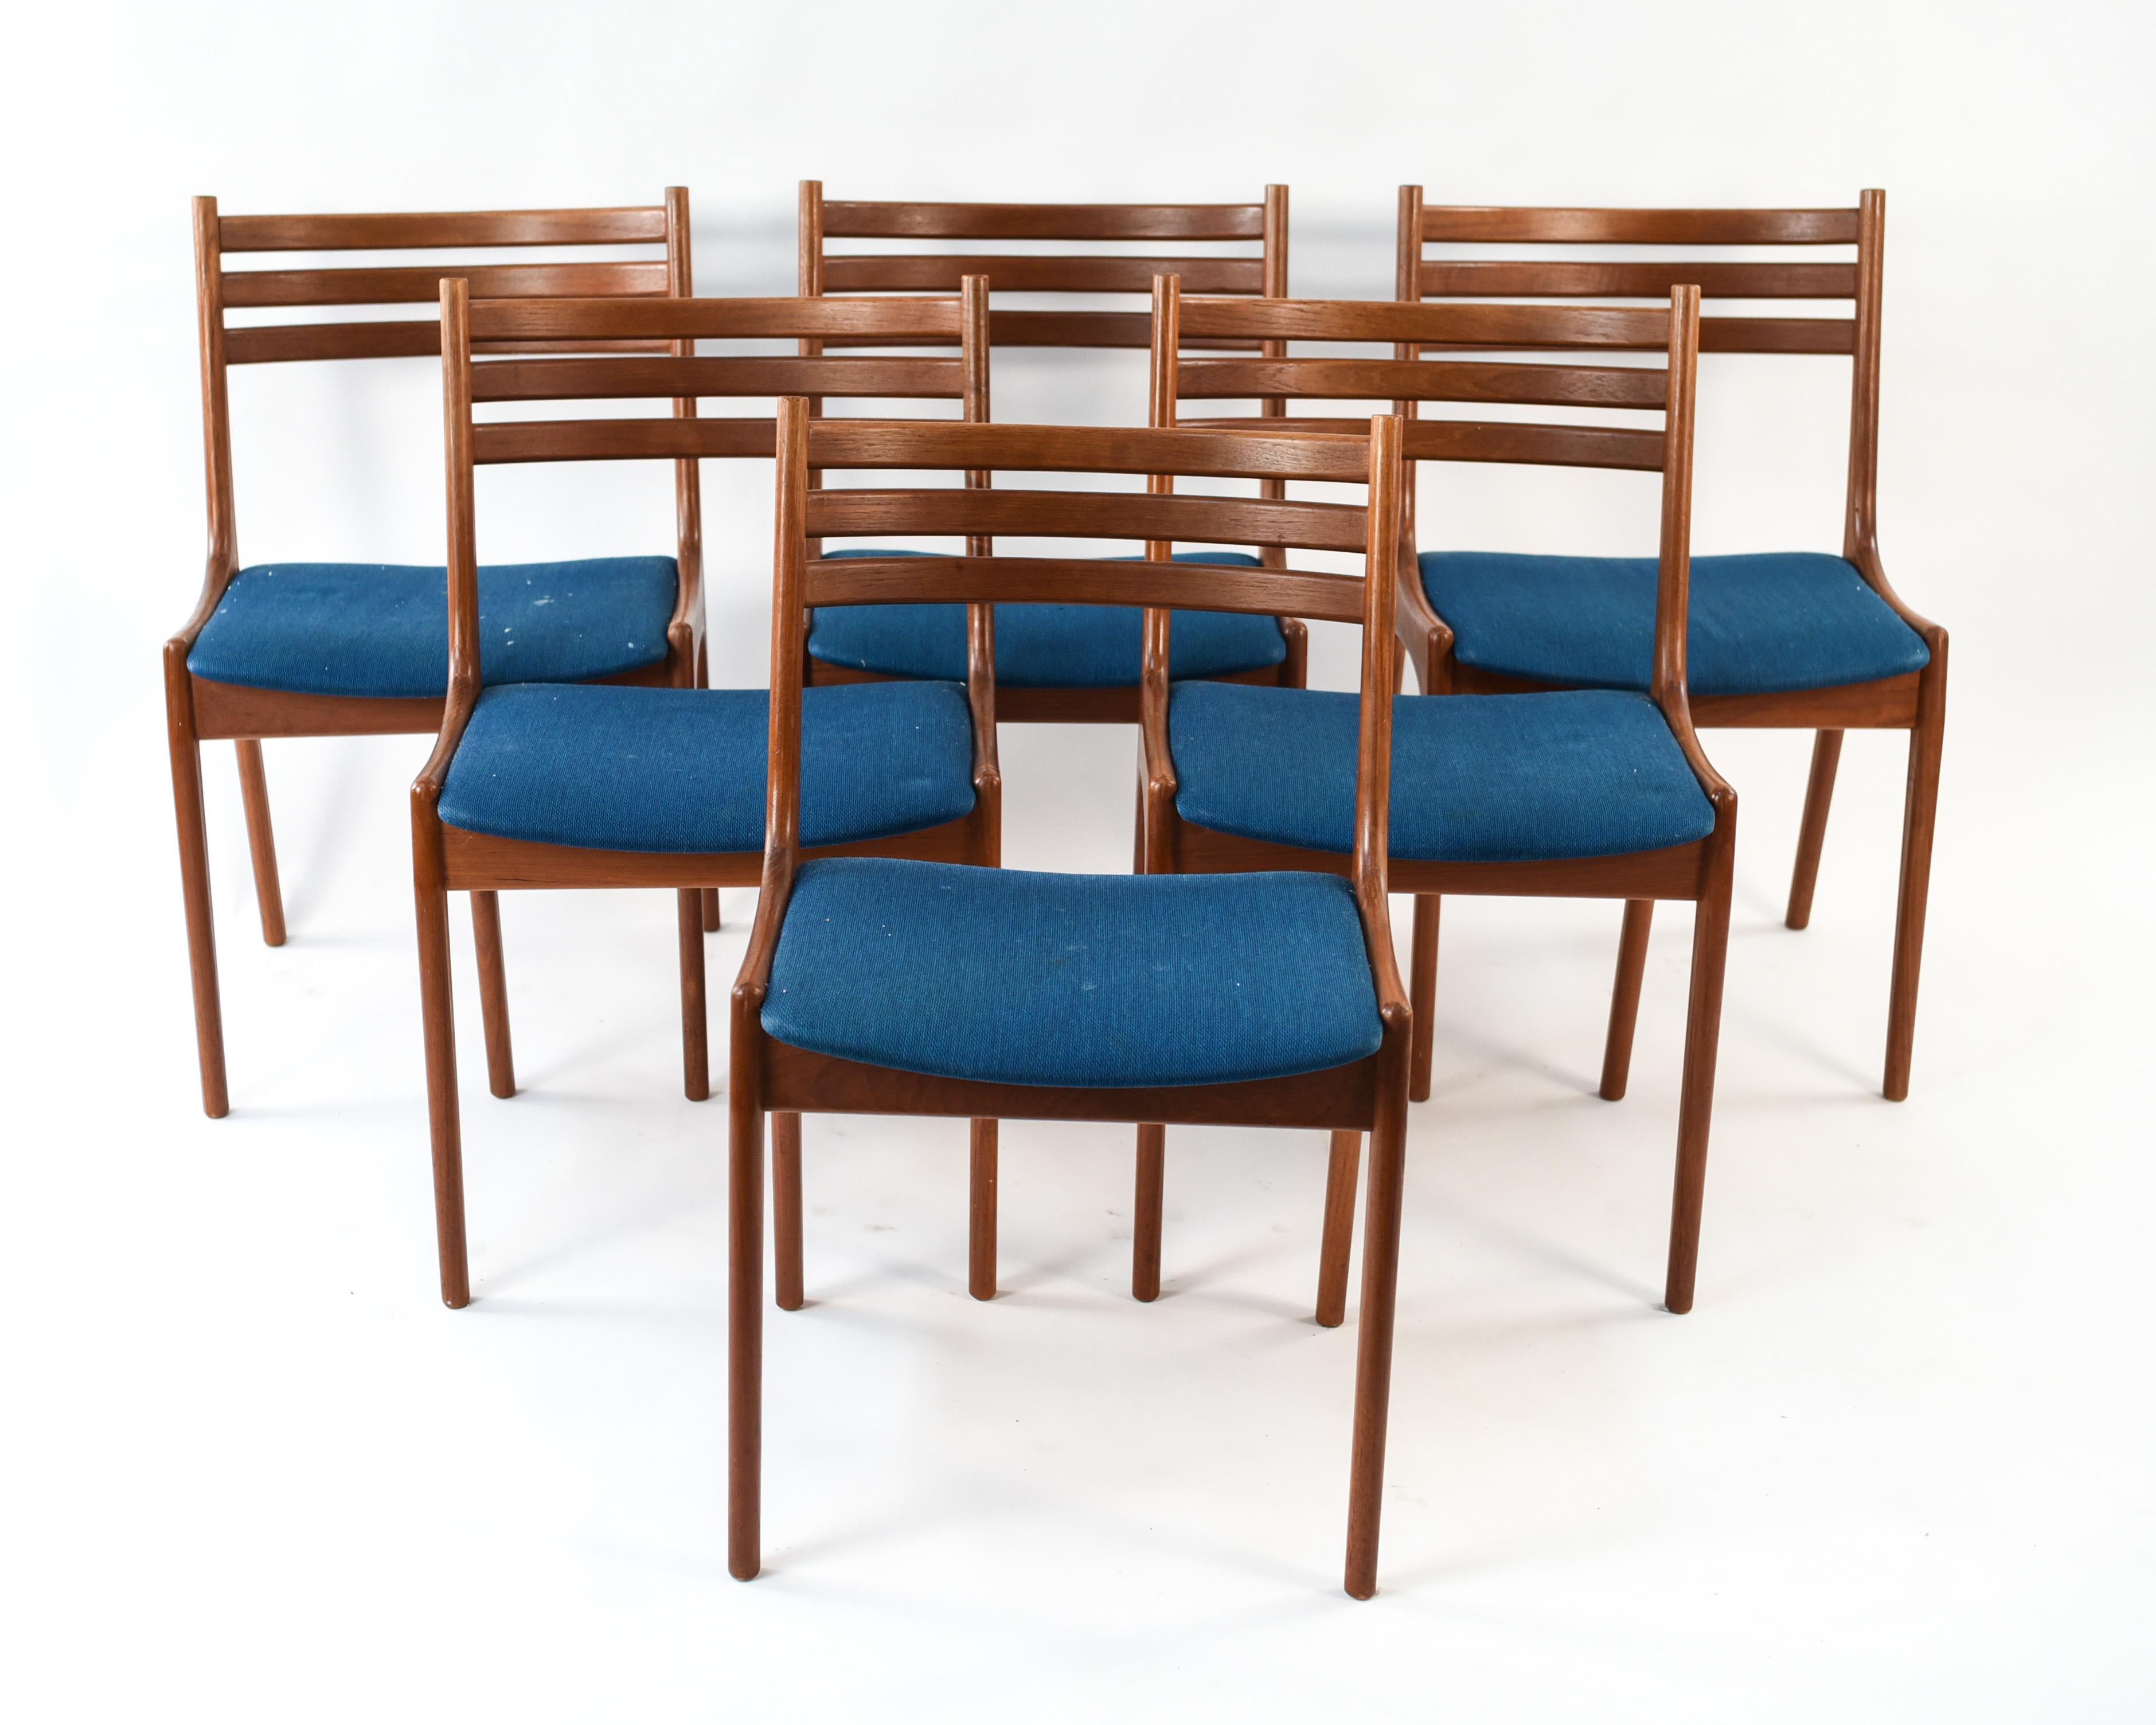 This is a great set of six teak dining chairs produced by K.S. Mobler. This design is attributed to Kai Kristiansen and features a rounded slat back with a slim frame throughout.